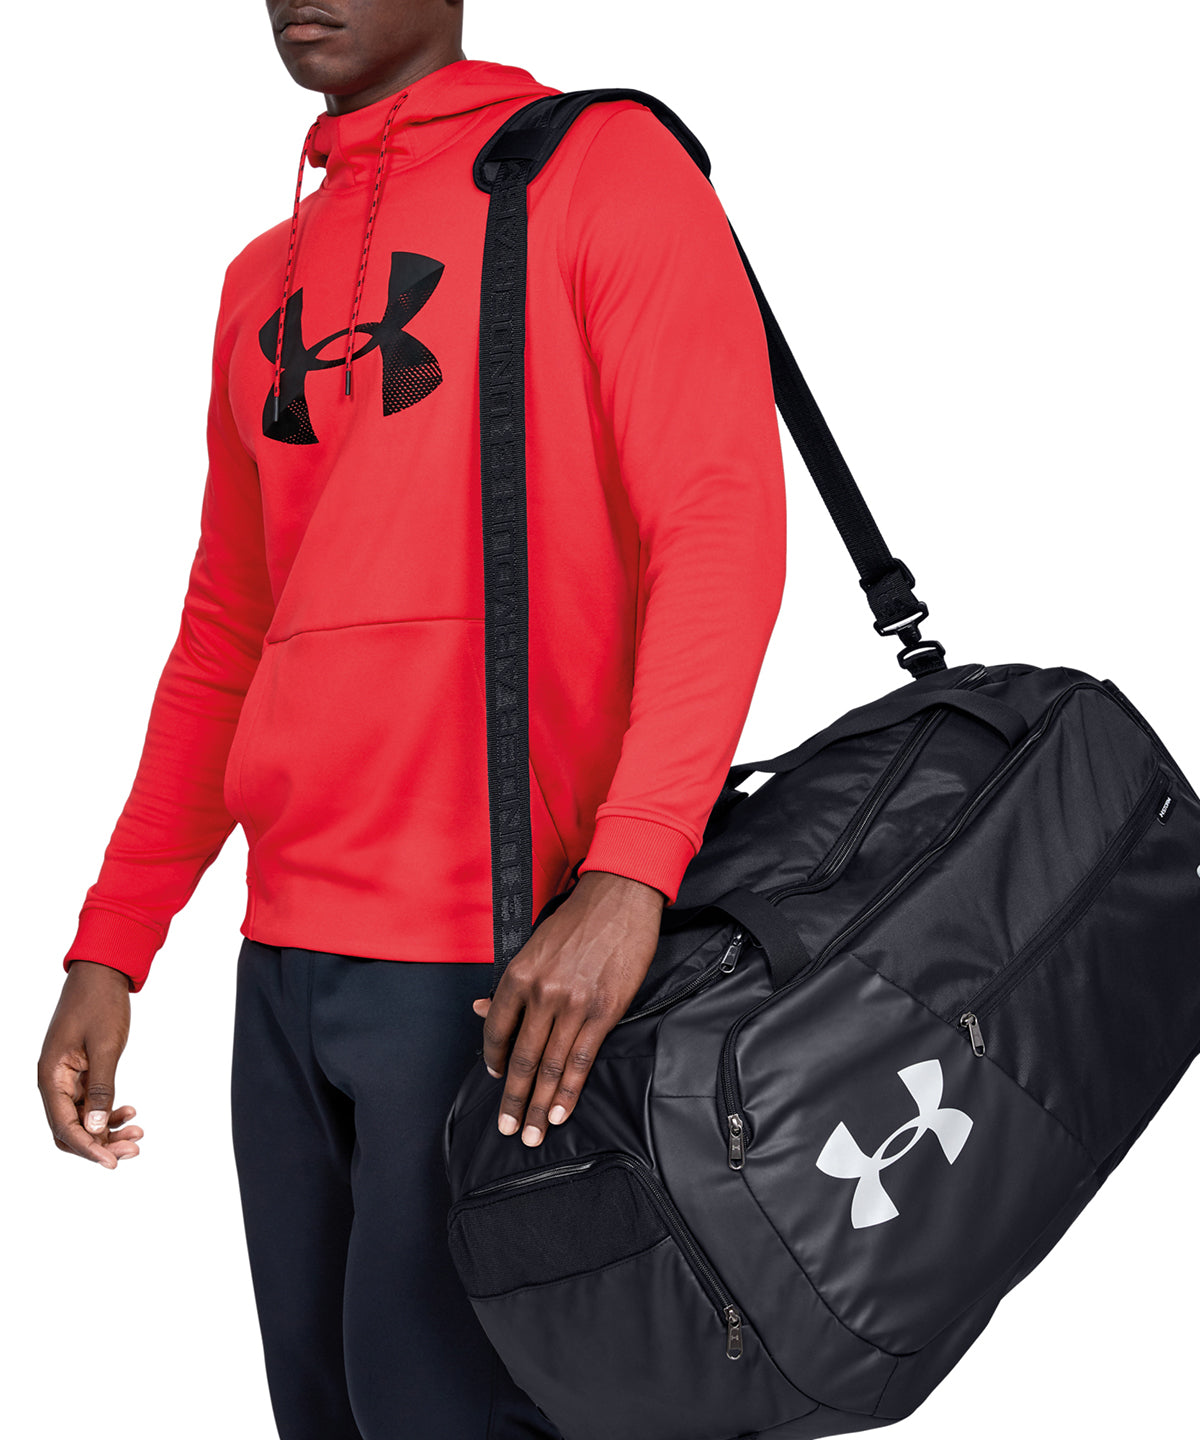 Under Armour Undeniable Duffel 5.0 Small Duffle Bag